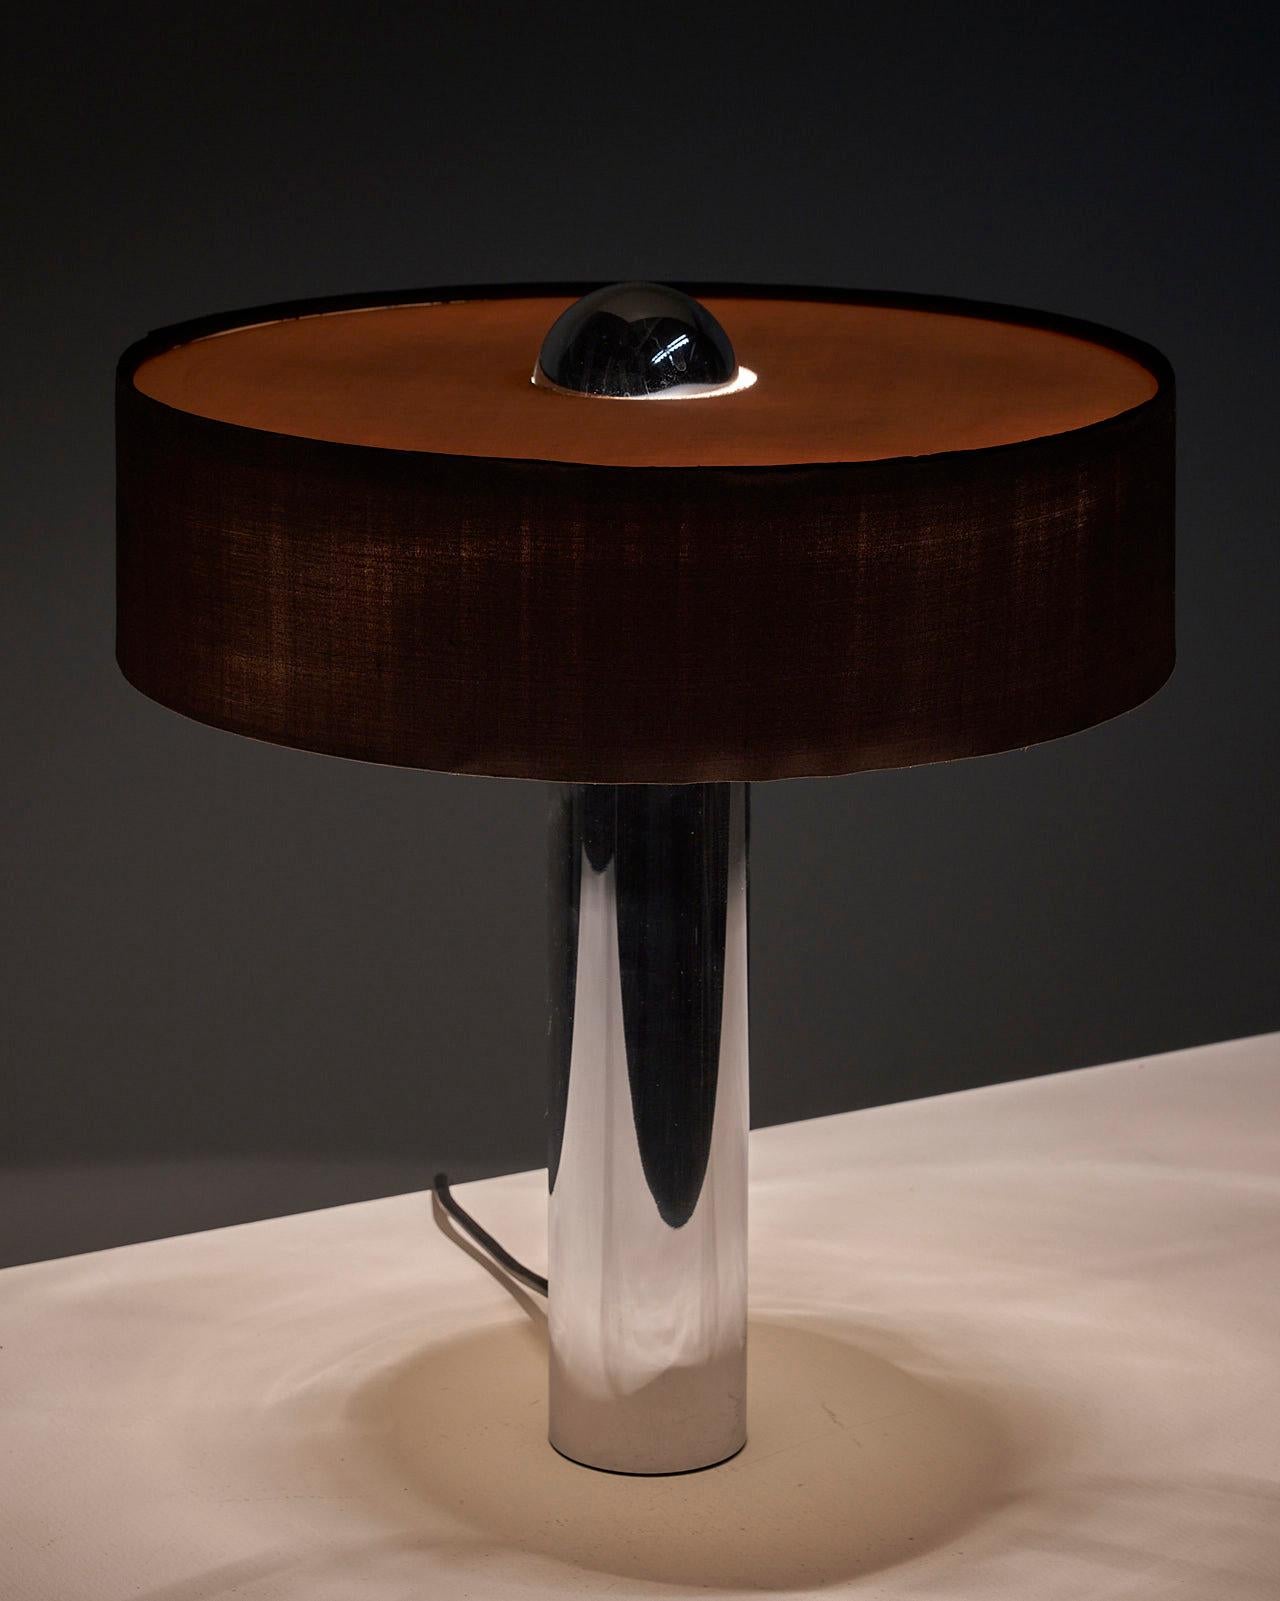 Introducing a remarkable Solid Chrome Table Lamp with a Brown Shade by Cosack, Germany. This stunning lamp combines the elegance of a heavy chrome base with its original brown and white shade, resulting in a harmonious and visually striking